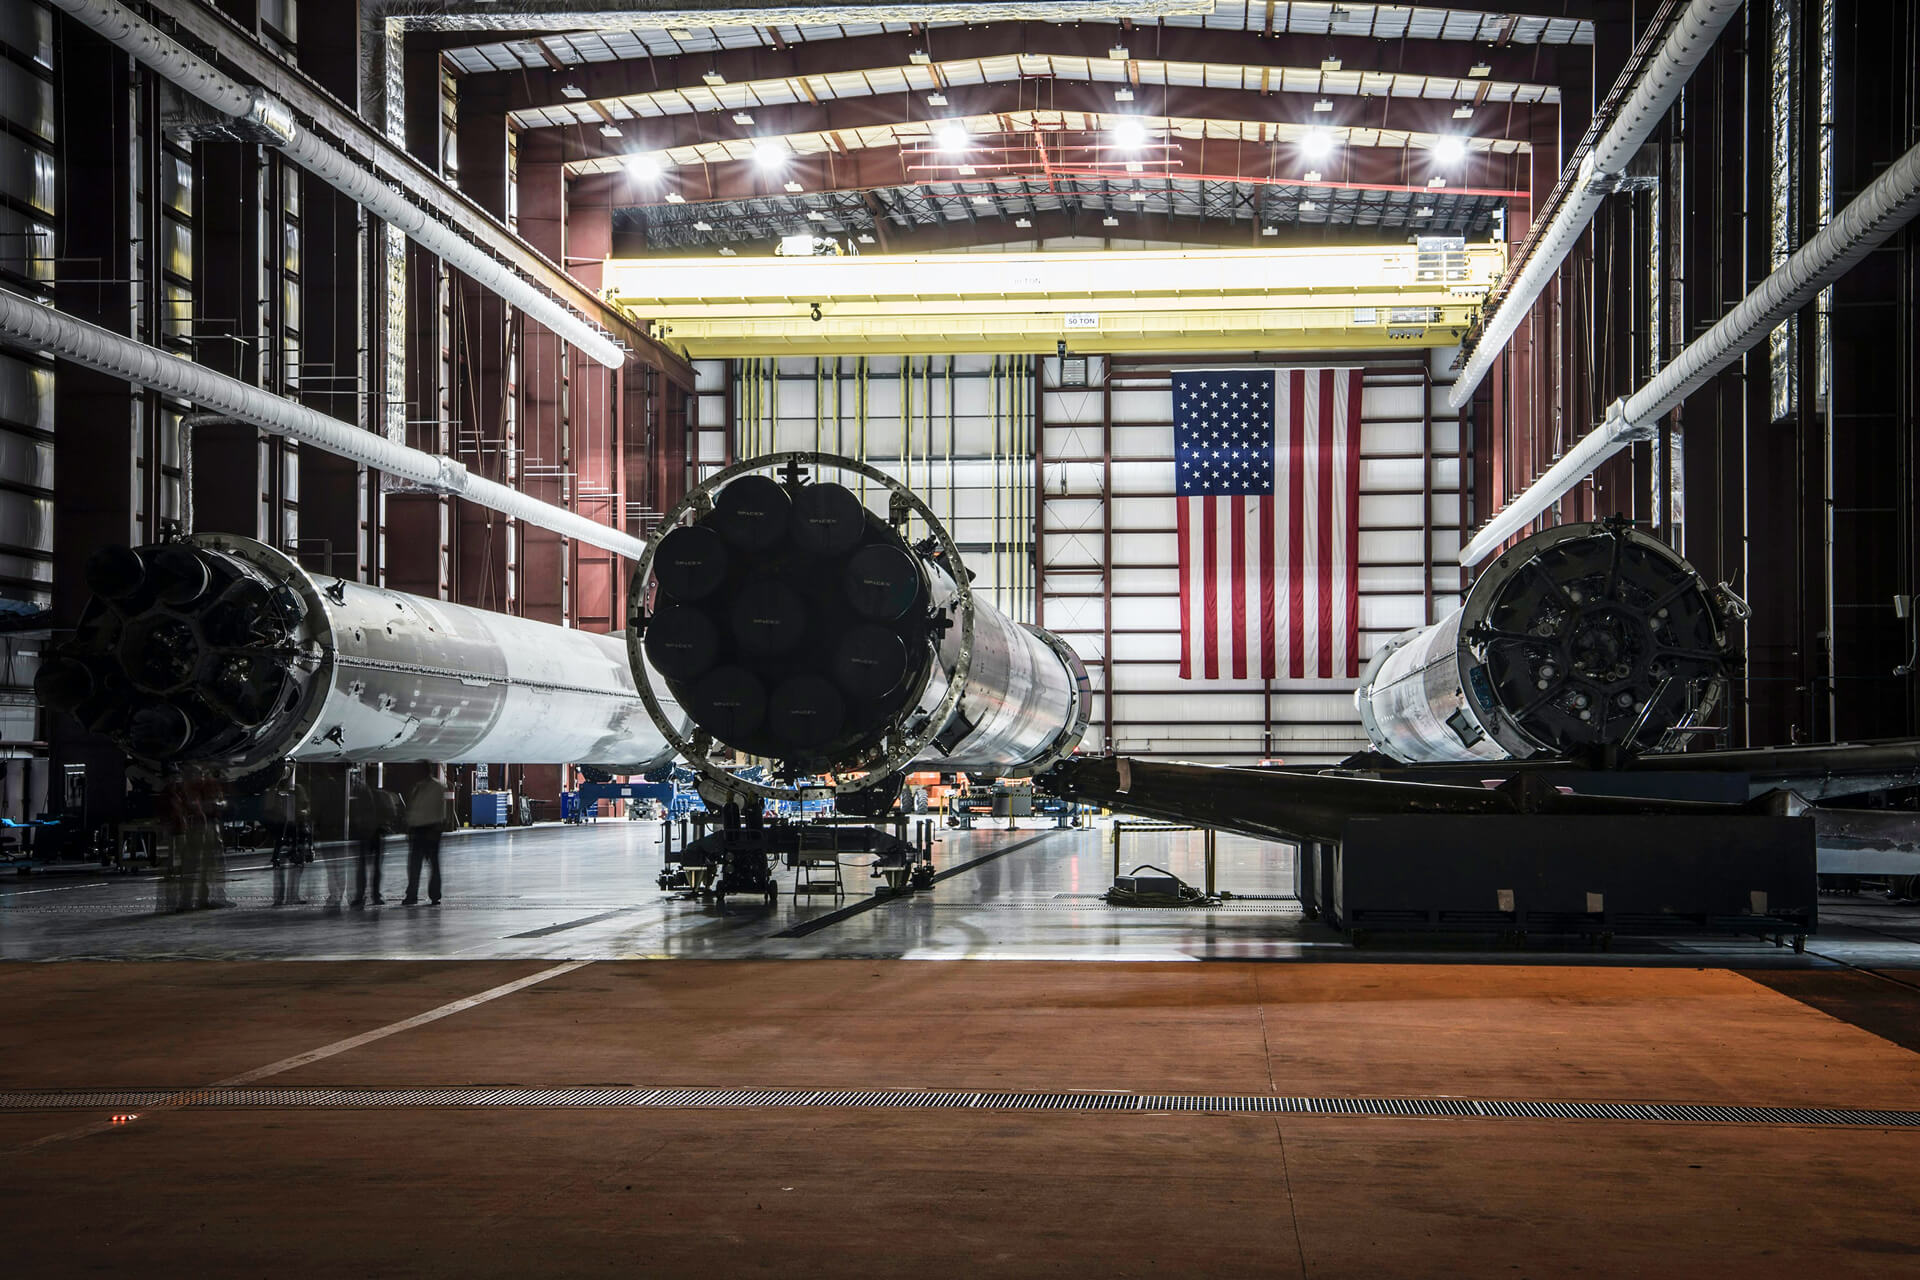 Three SpaceX rockets being prepared at Kennedy Space Center with an American flag in the background.